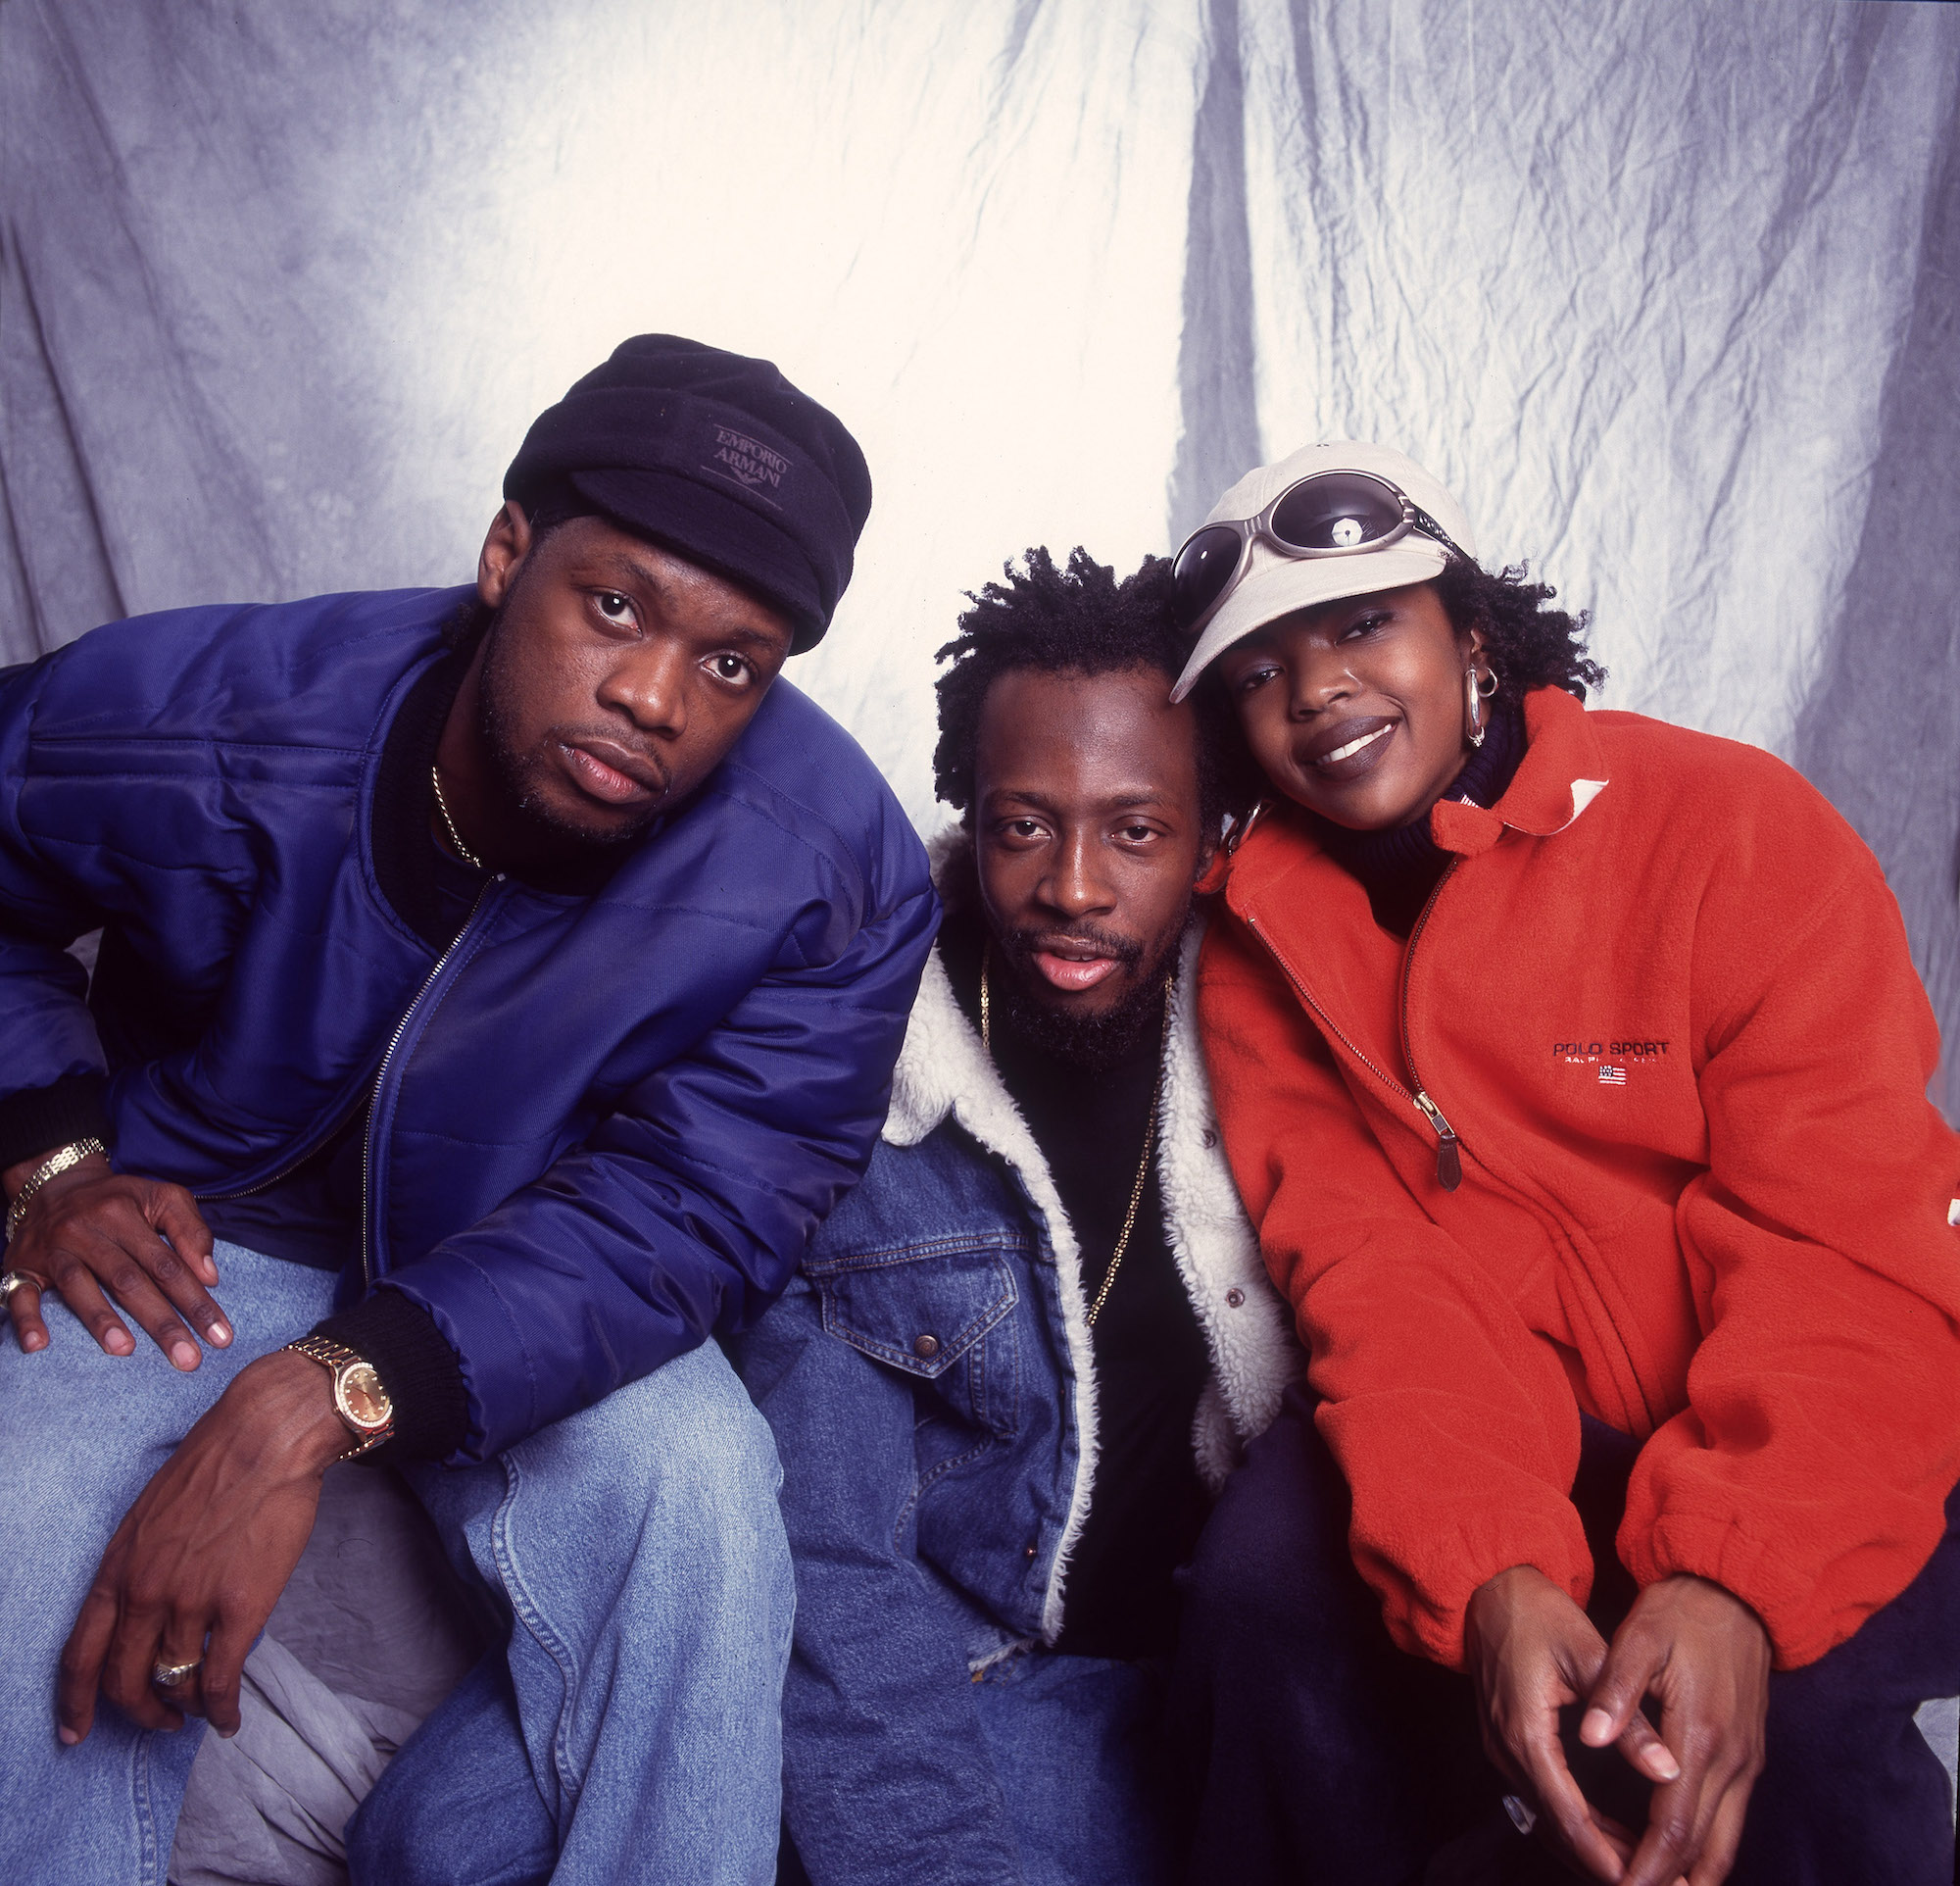 The Fugees as they pose backstage at the Allstate Arena, Rosemont, Illinois, September 2, 1997.